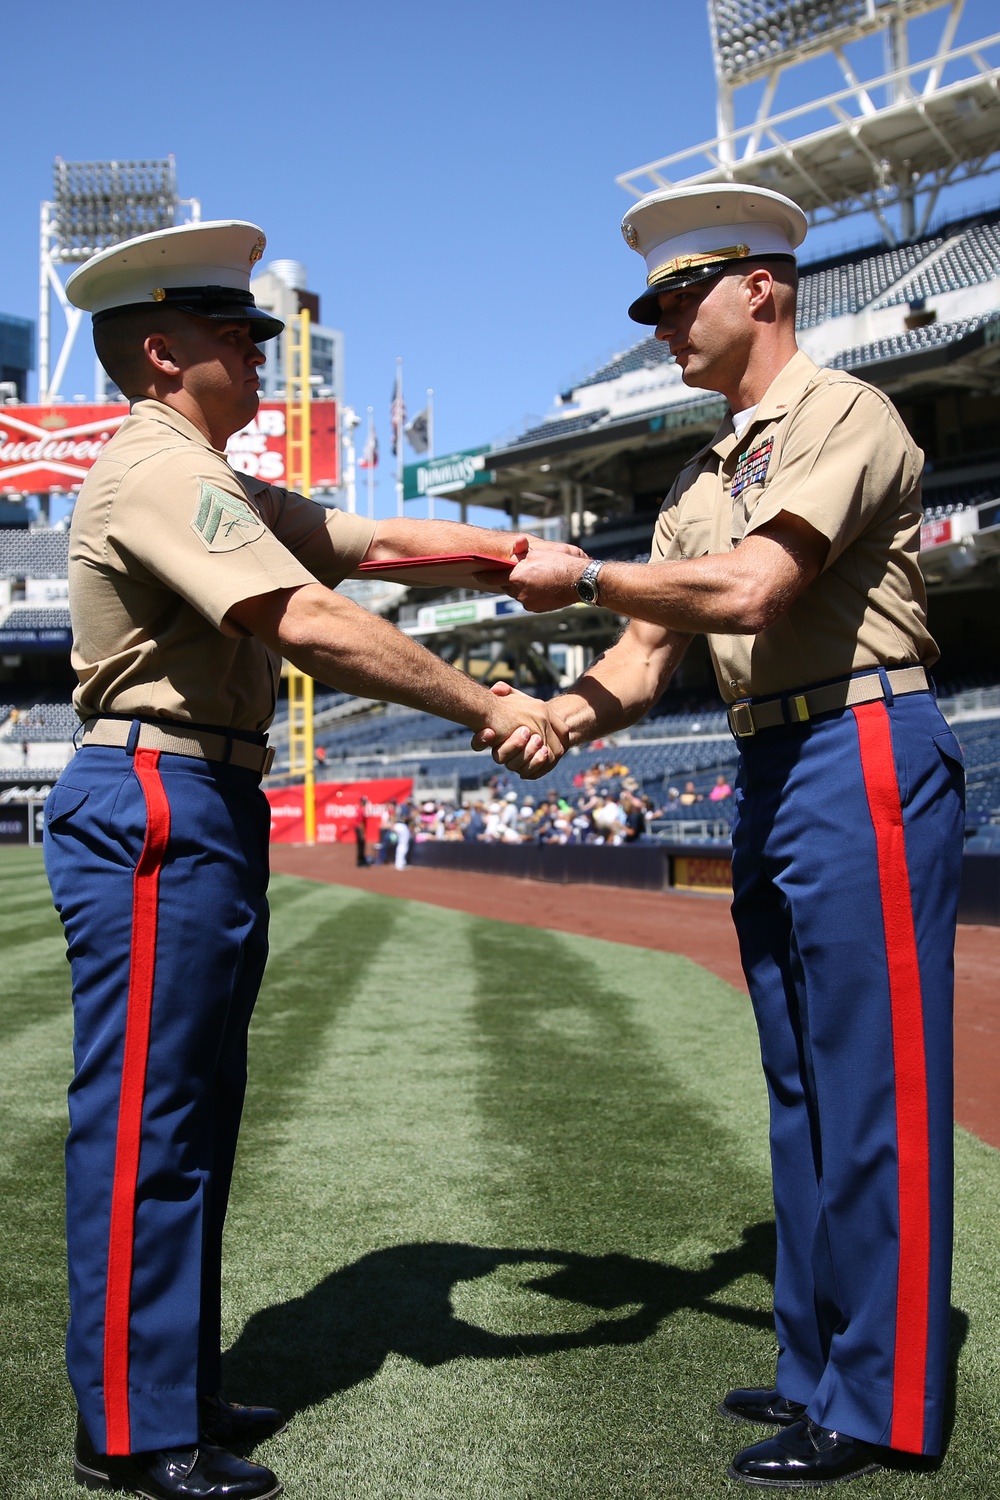 Noncommissioned officer hits home run with re-enlistment package